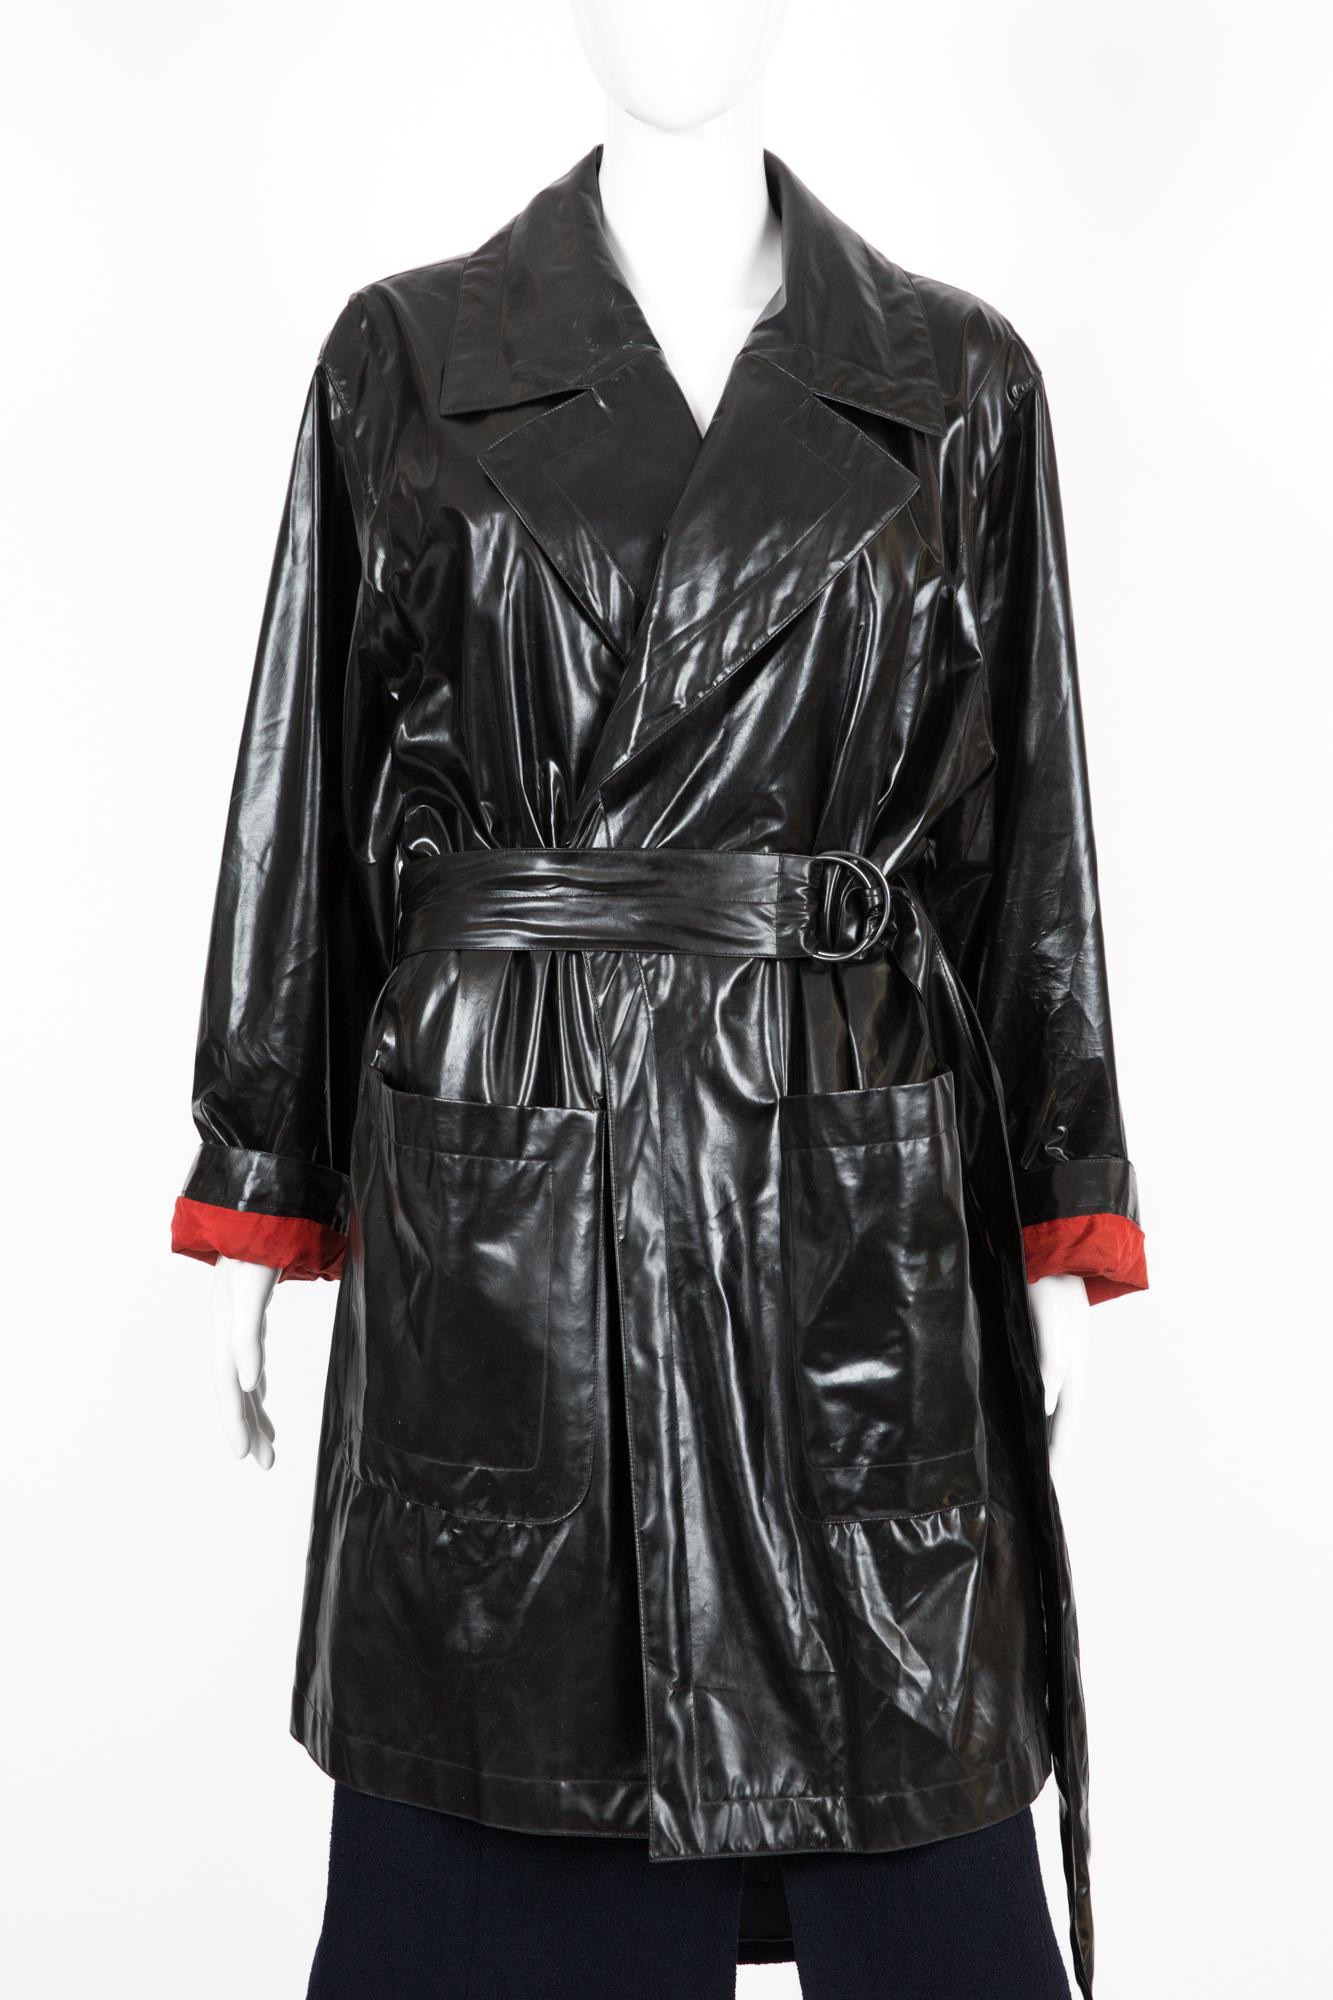 1991, Yves Saint Laurent Rive Gauche YSL black patent trench coat featuring a red cotton lining,  a separated belt, large sides pockets.
In good vintage condition. Made in France. 
Estimated size 40fr/US8/UK12
We guarantee you will receive this